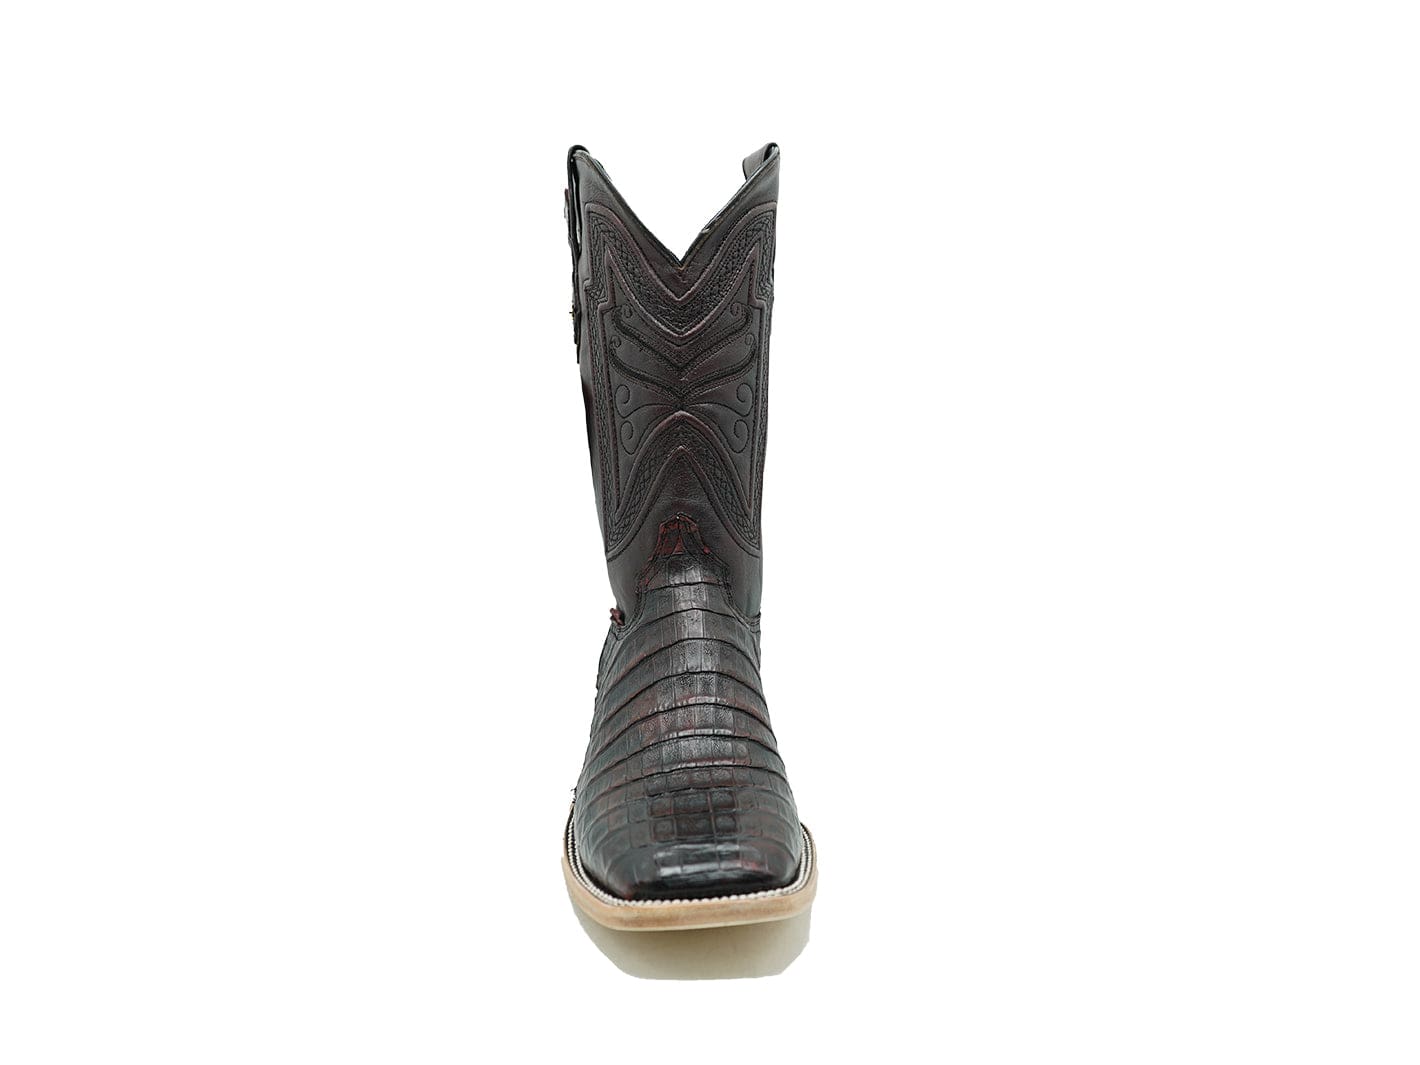 Texas Country Exotic Boot Caiman Belly Cola Black Cherry SP Type B Square Toe LM10B